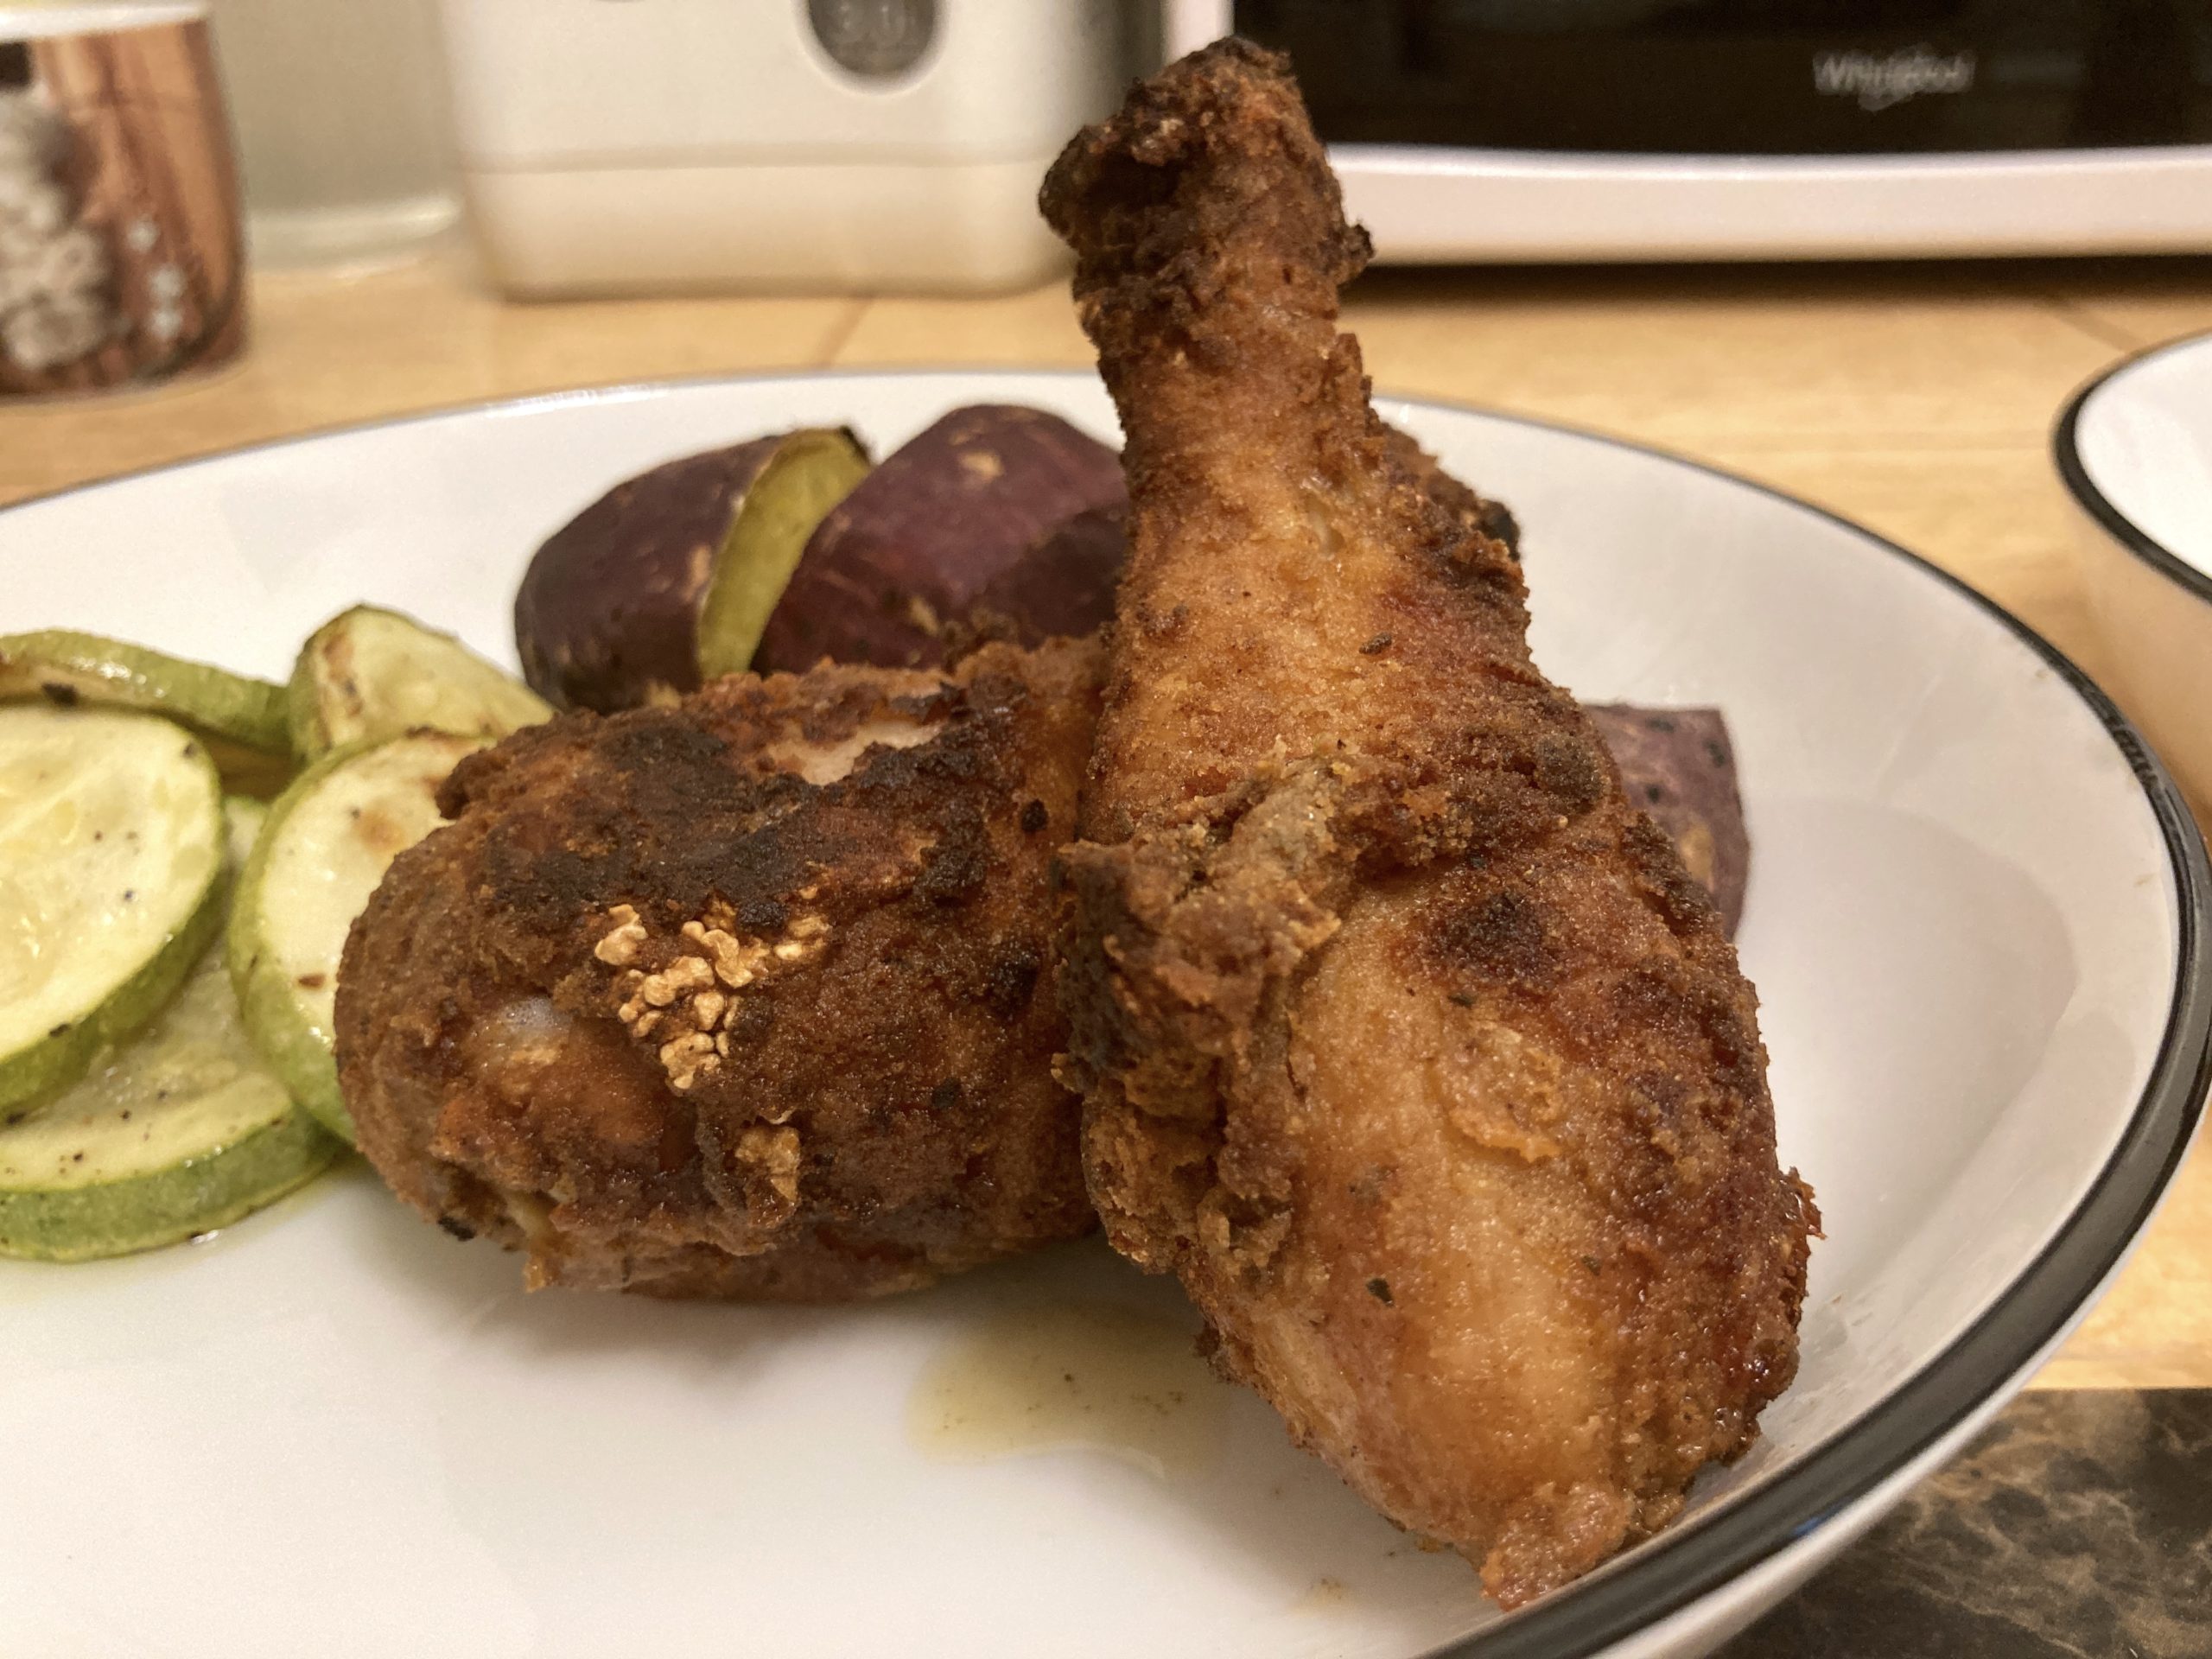 Mayo Fried Chicken – optimised for minimal cleanup